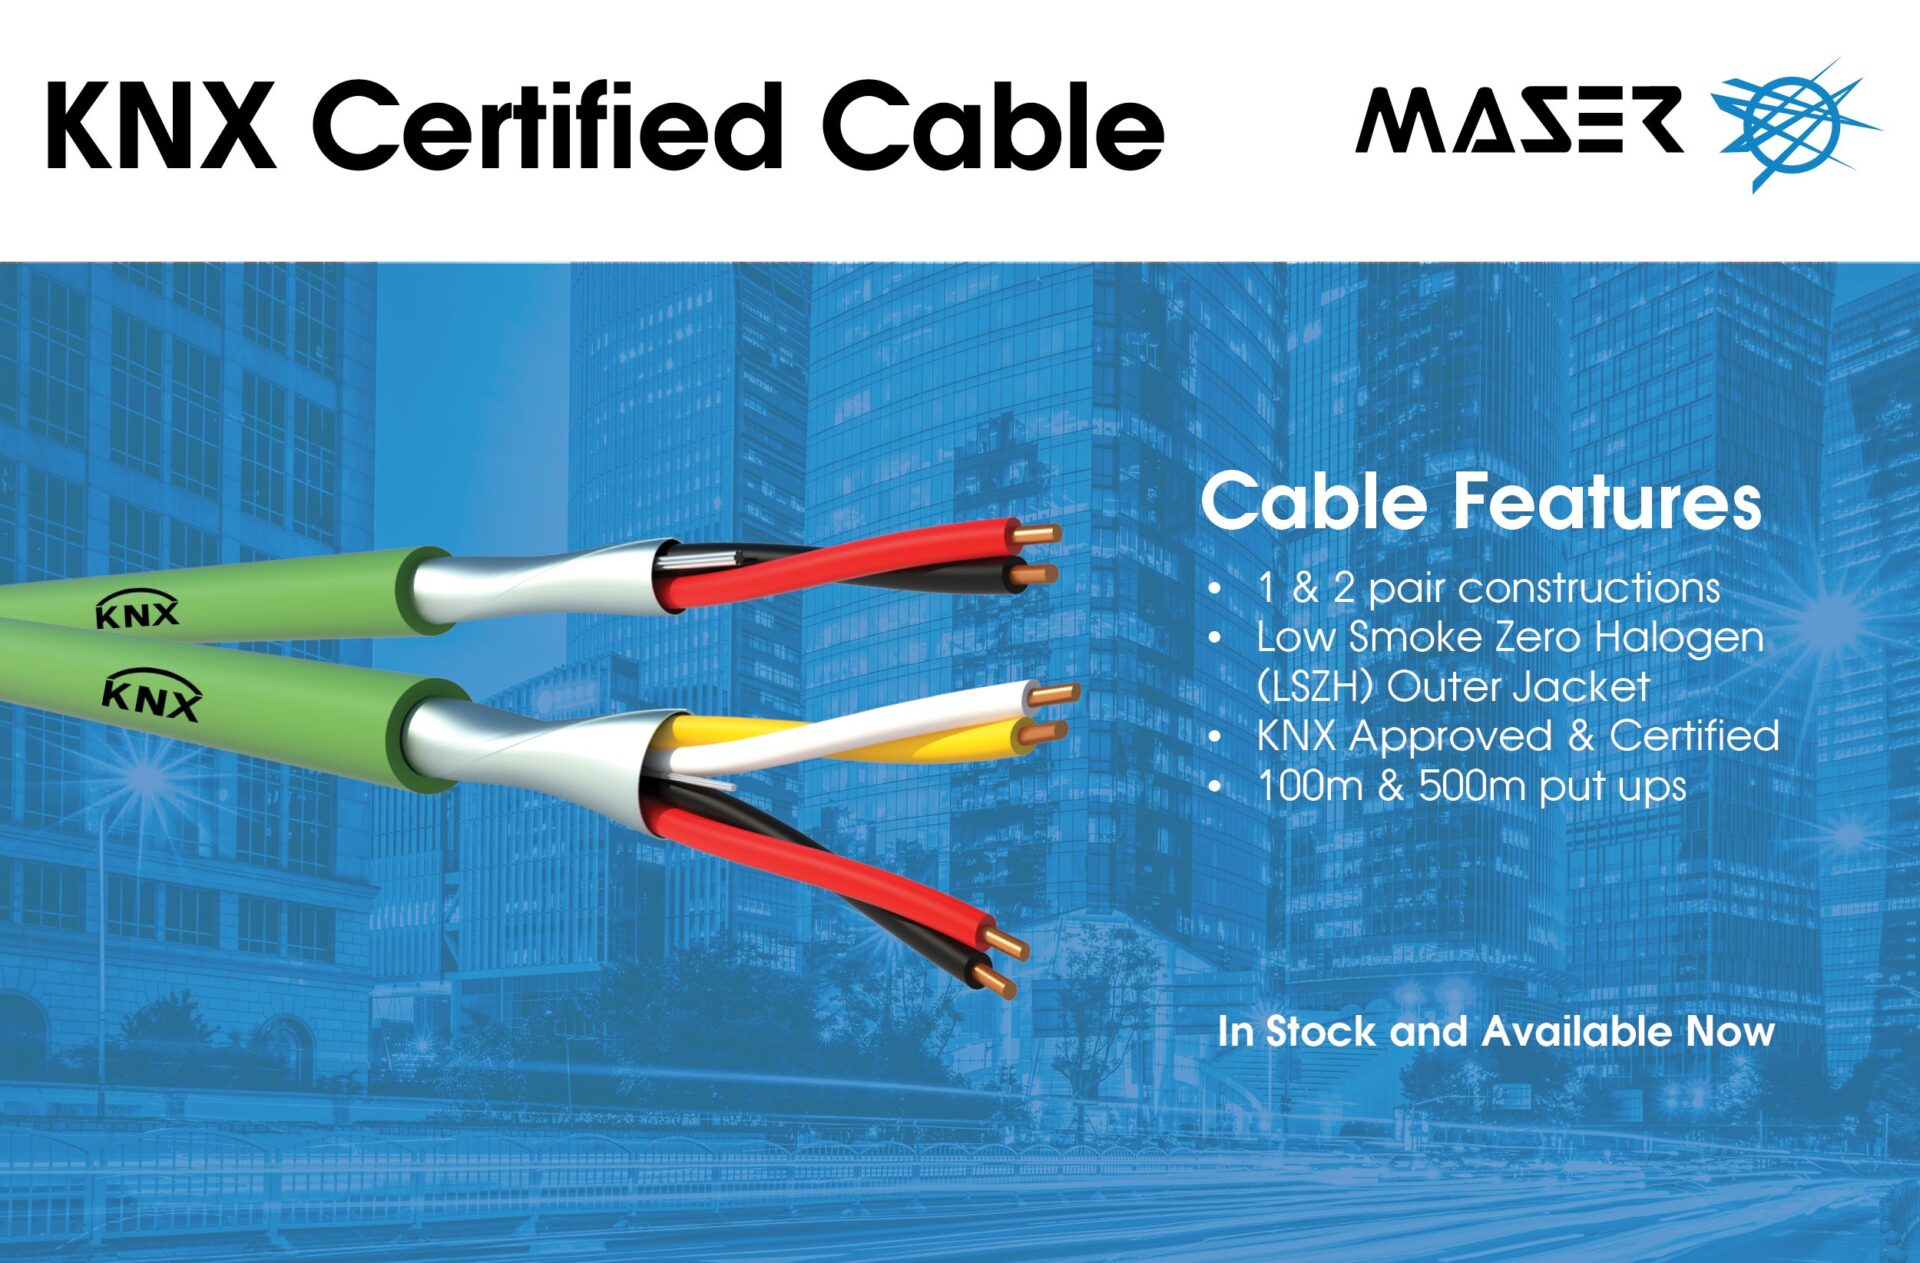 KNX Approved and Certified Cable available now